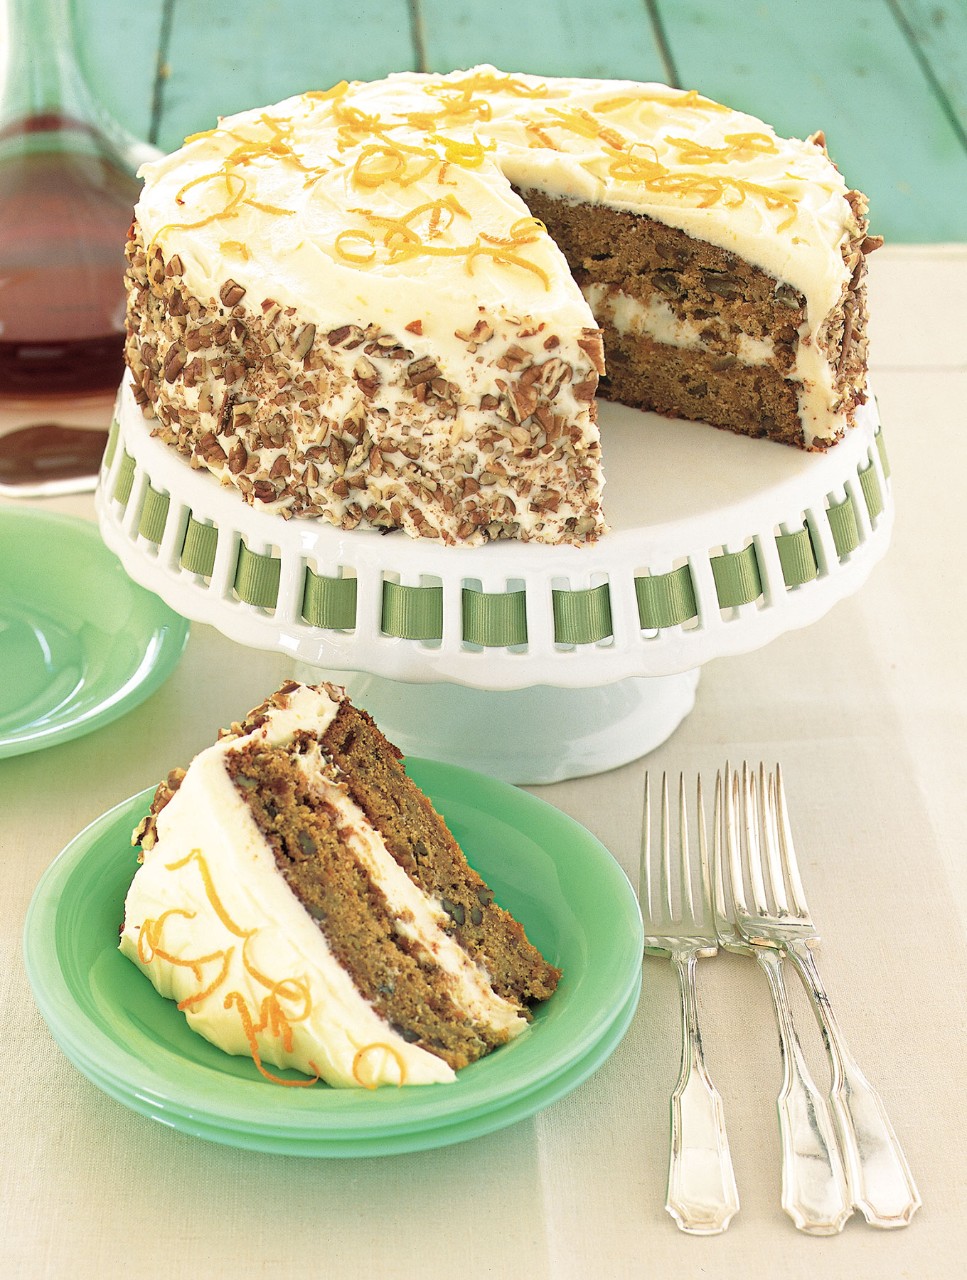 Honey Butter Carrot Cake With Toasted Pecans and Citrus Cream Cheese Icing